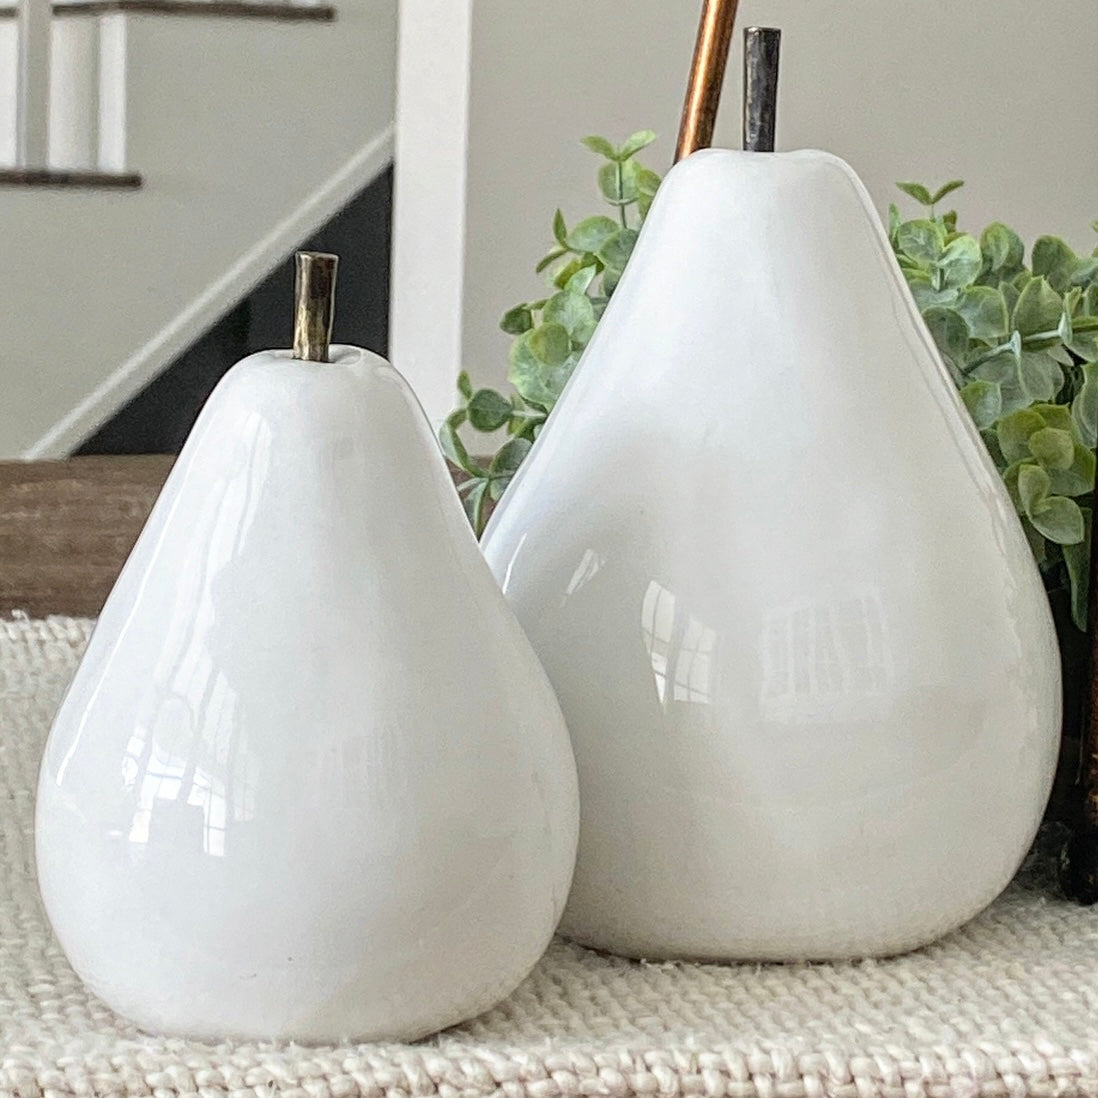 Ceramic Pear, choose from 2 sizes 50% OFF SALE